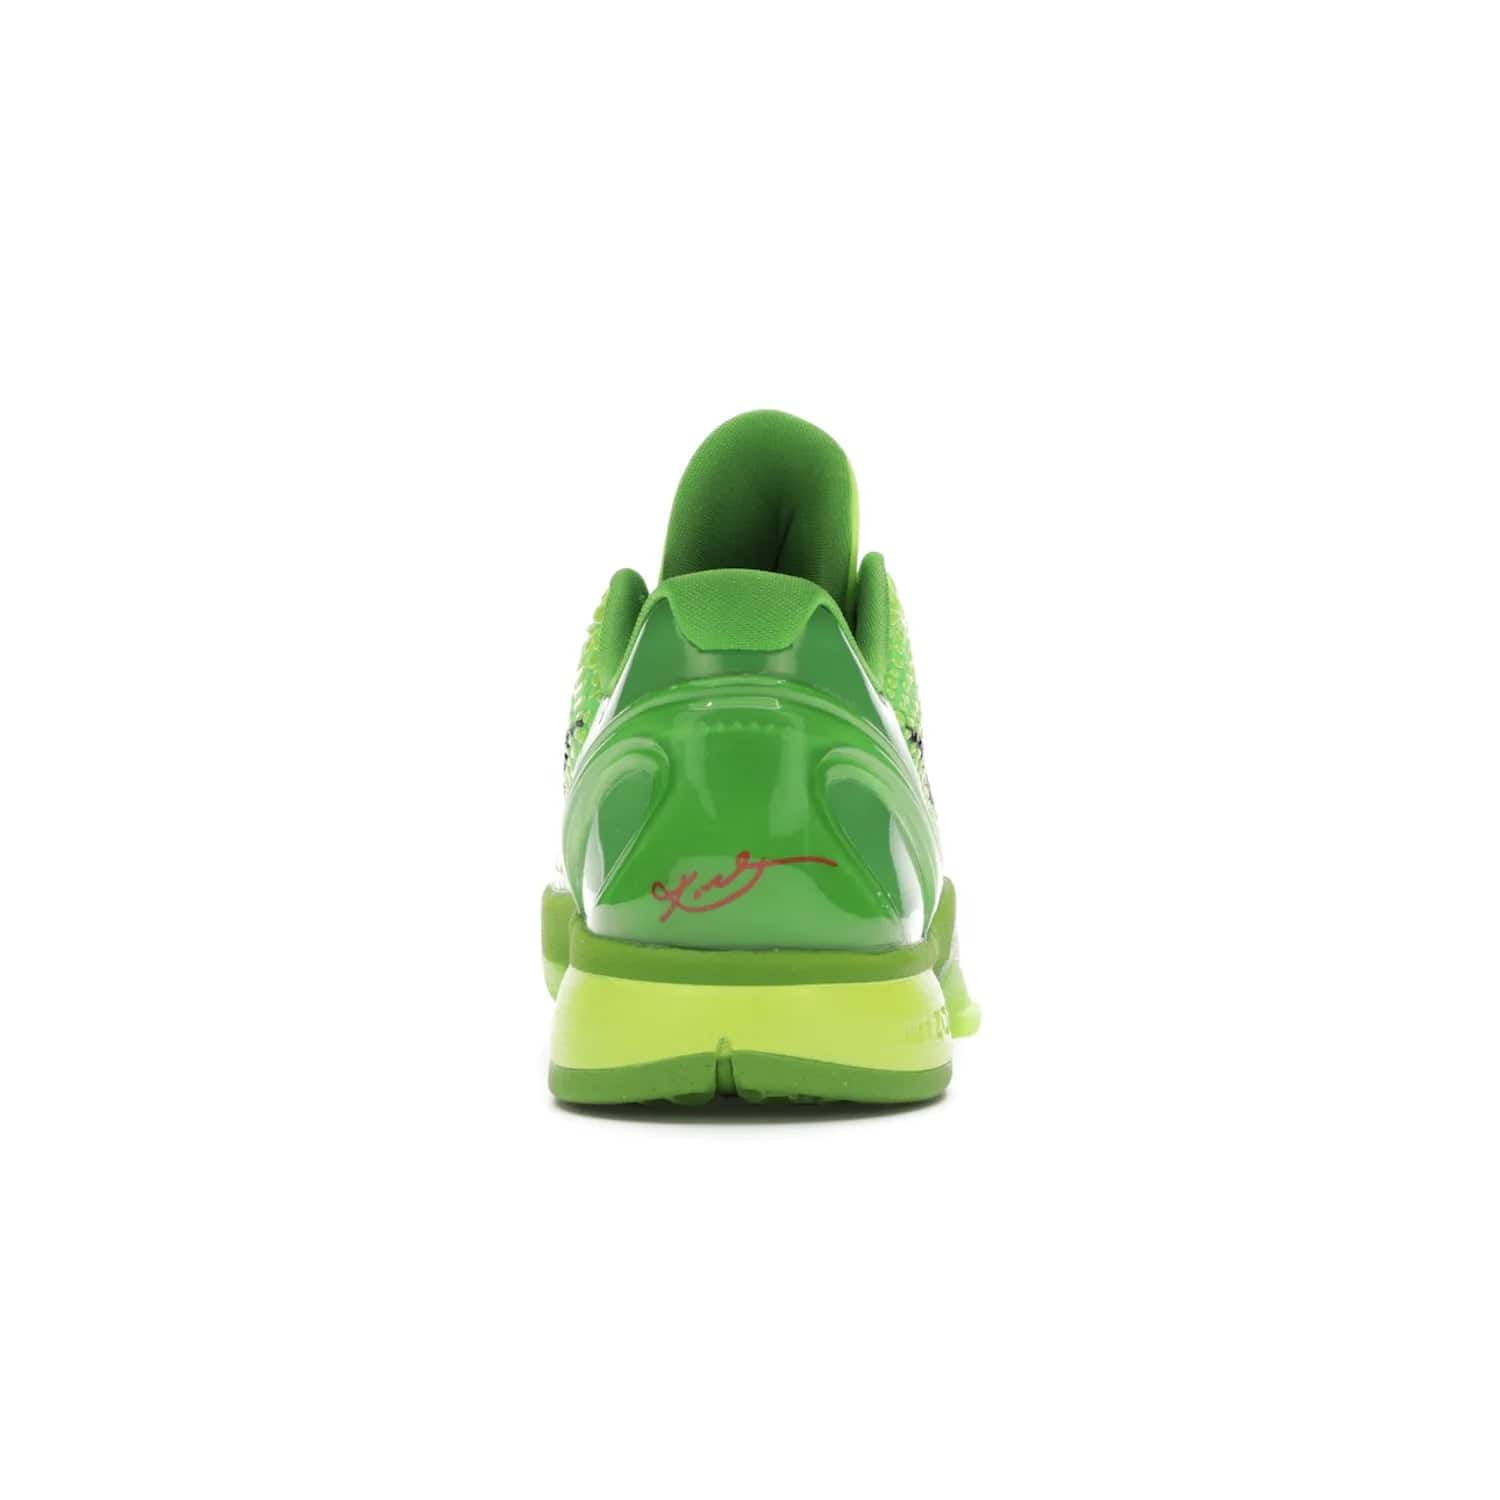 Nike Kobe 6 Protro Grinch (2020) - Image 28 - Only at www.BallersClubKickz.com - #
The Nike Kobe 6 Protro Grinch updates the iconic 2011 design with modern tech like a Zoom Air cushioning system, scaled-down traction, and updated silhouette. Experience the textured Green Apple and Volt upper plus bright red and green accents for $180.